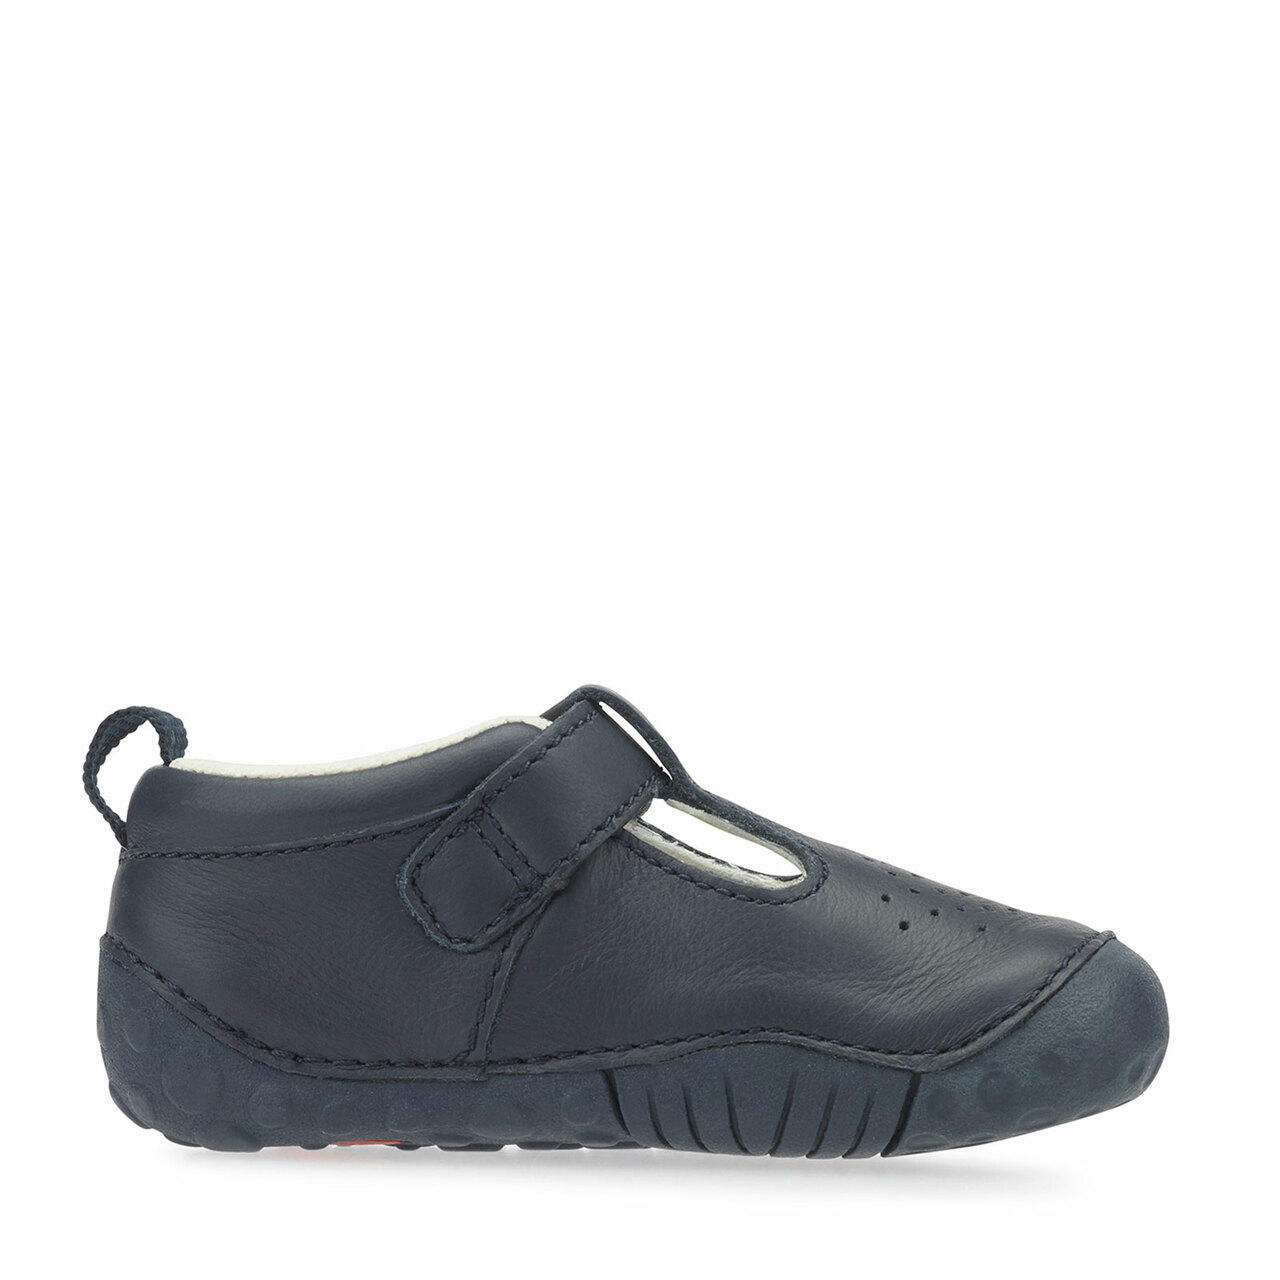 A boys T-Bar shoe by Start-Rite, style Baby Jack, in navy leather with punch out detail and buckle fastening. Left side view.